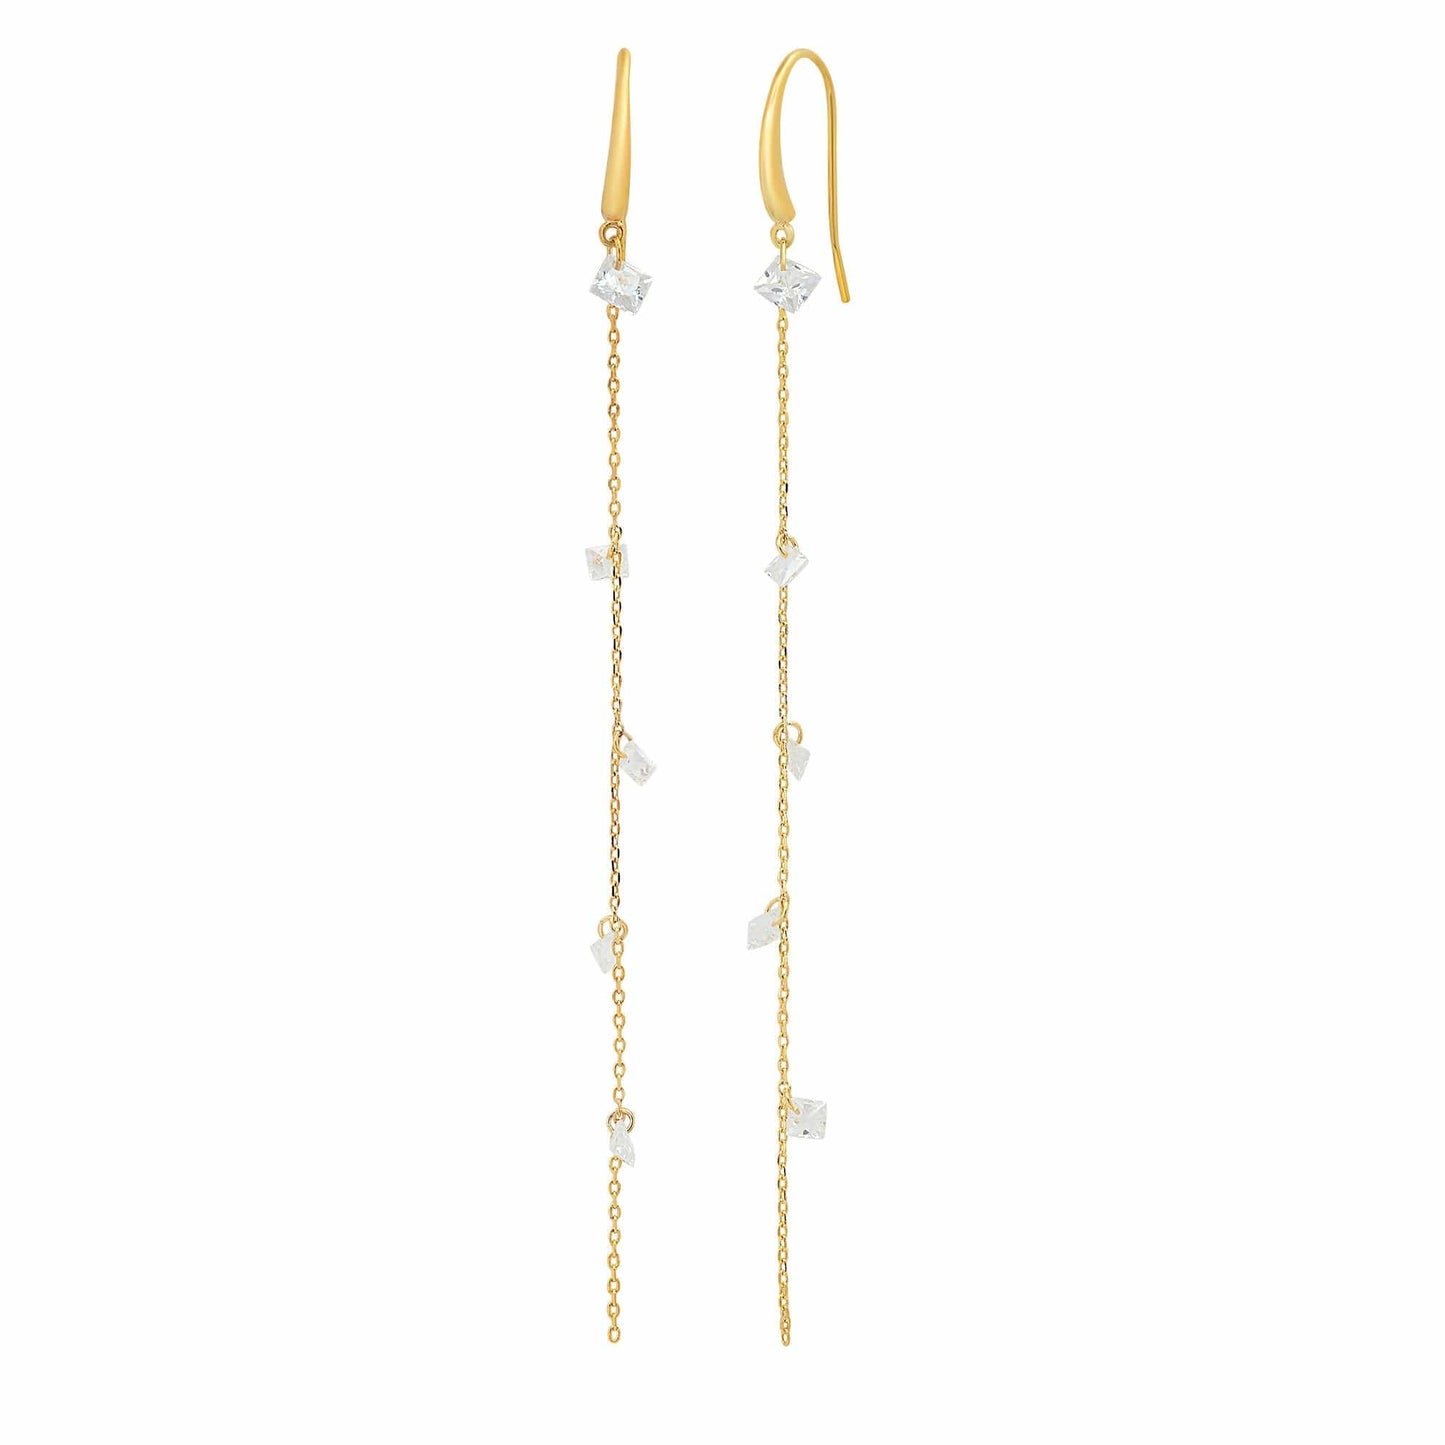 EAR-GPL Gold Plated Hook Chain and Unset CZ Earrings